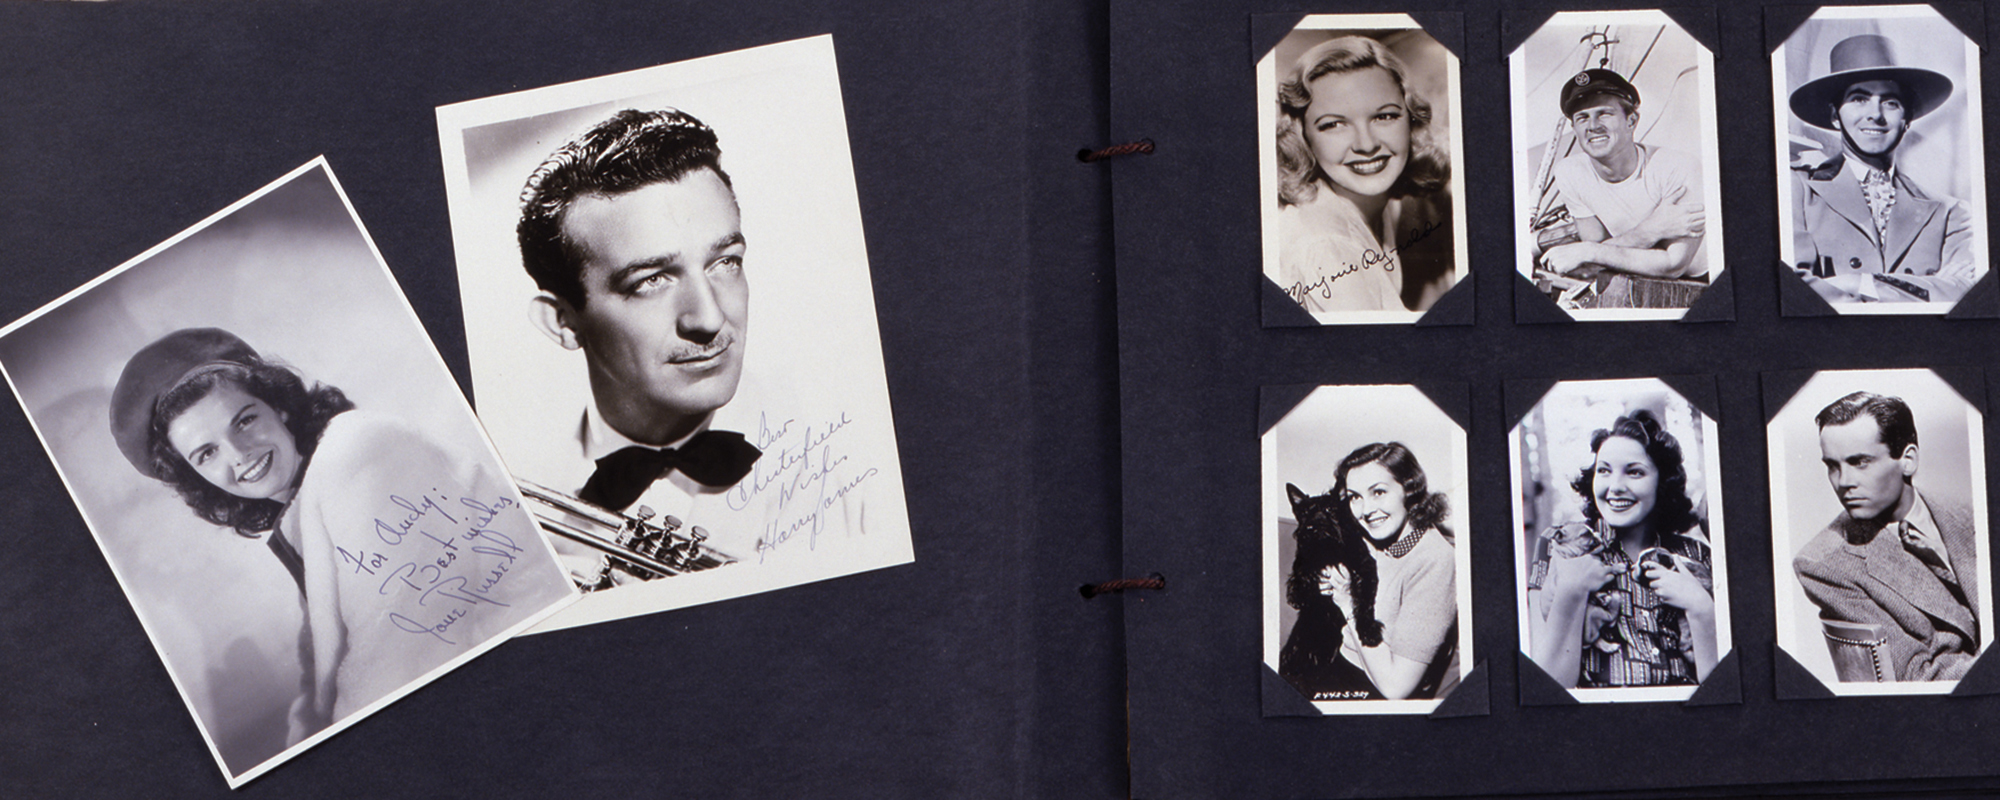 scrapbook with photos of old movie stars